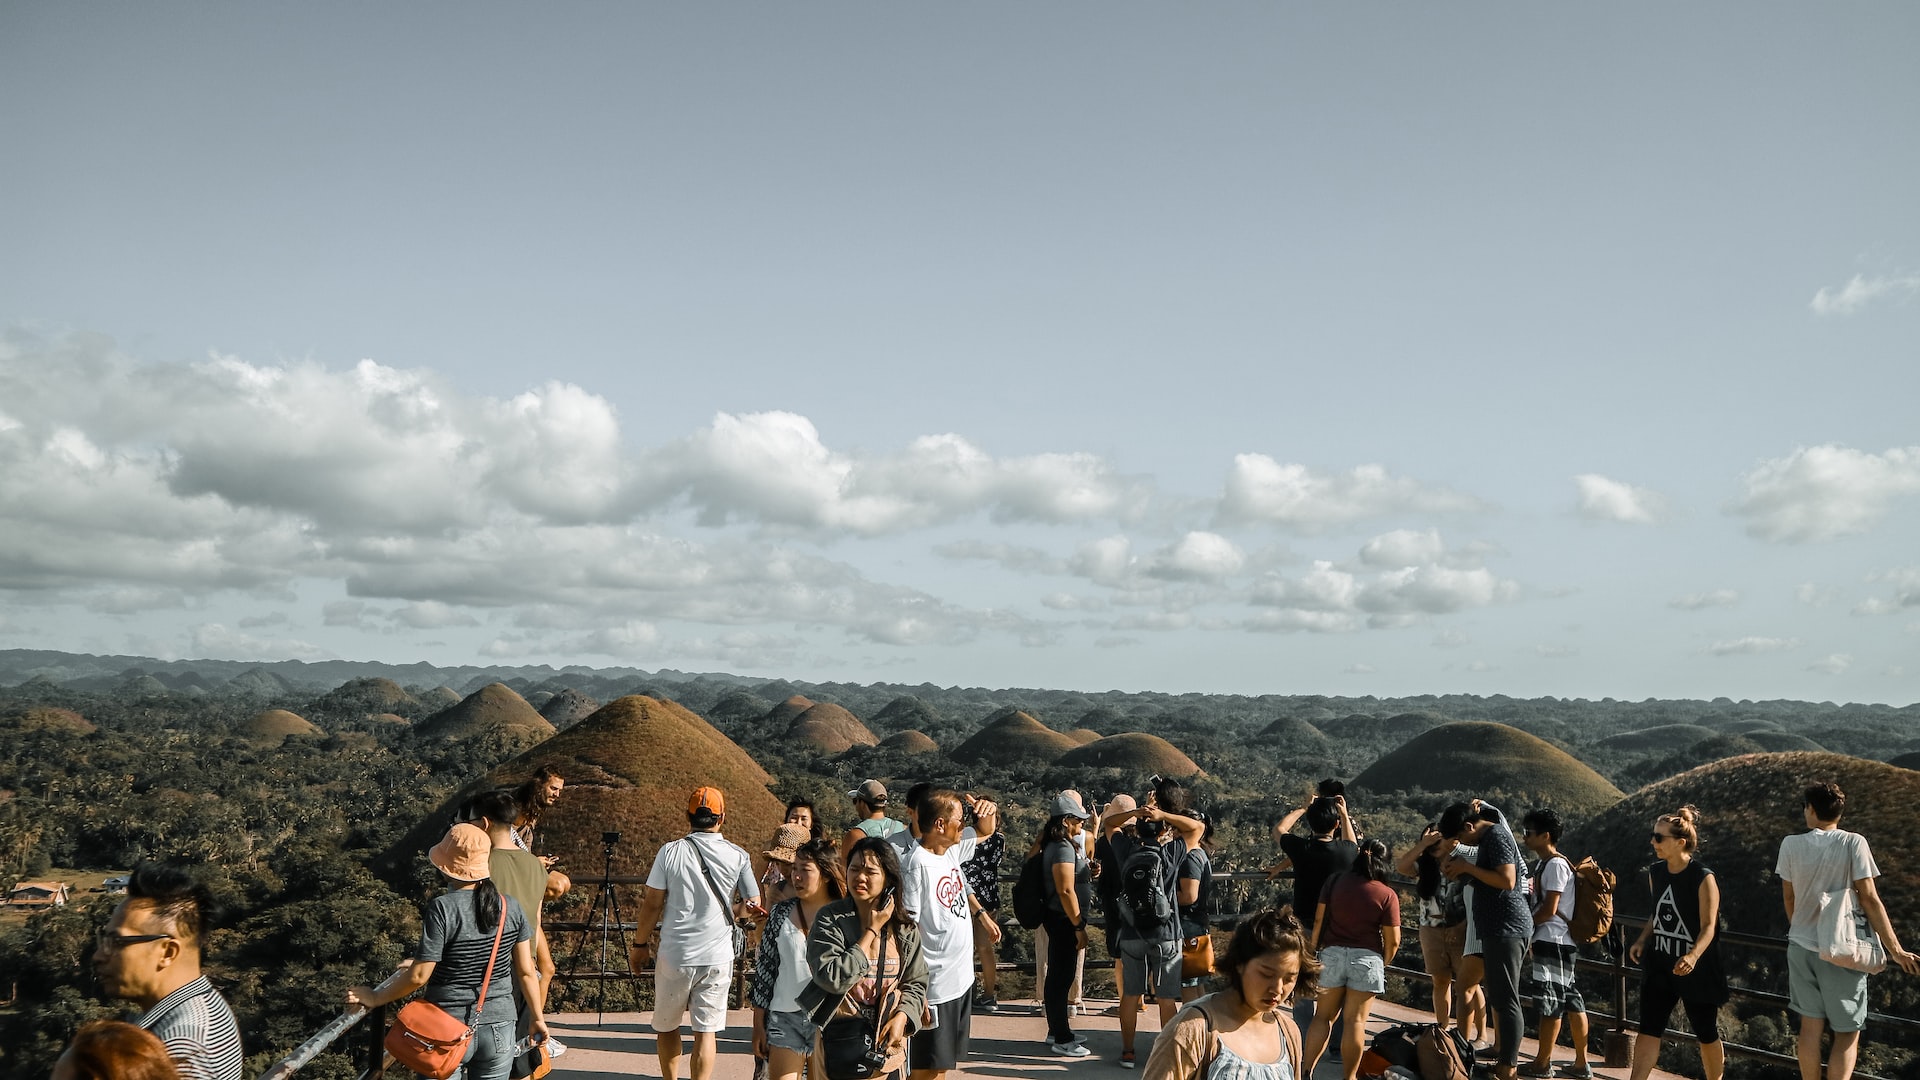 Local and foreign tourists in the Philippines looking at an aerial view of the Chocolate Hills in Bohol